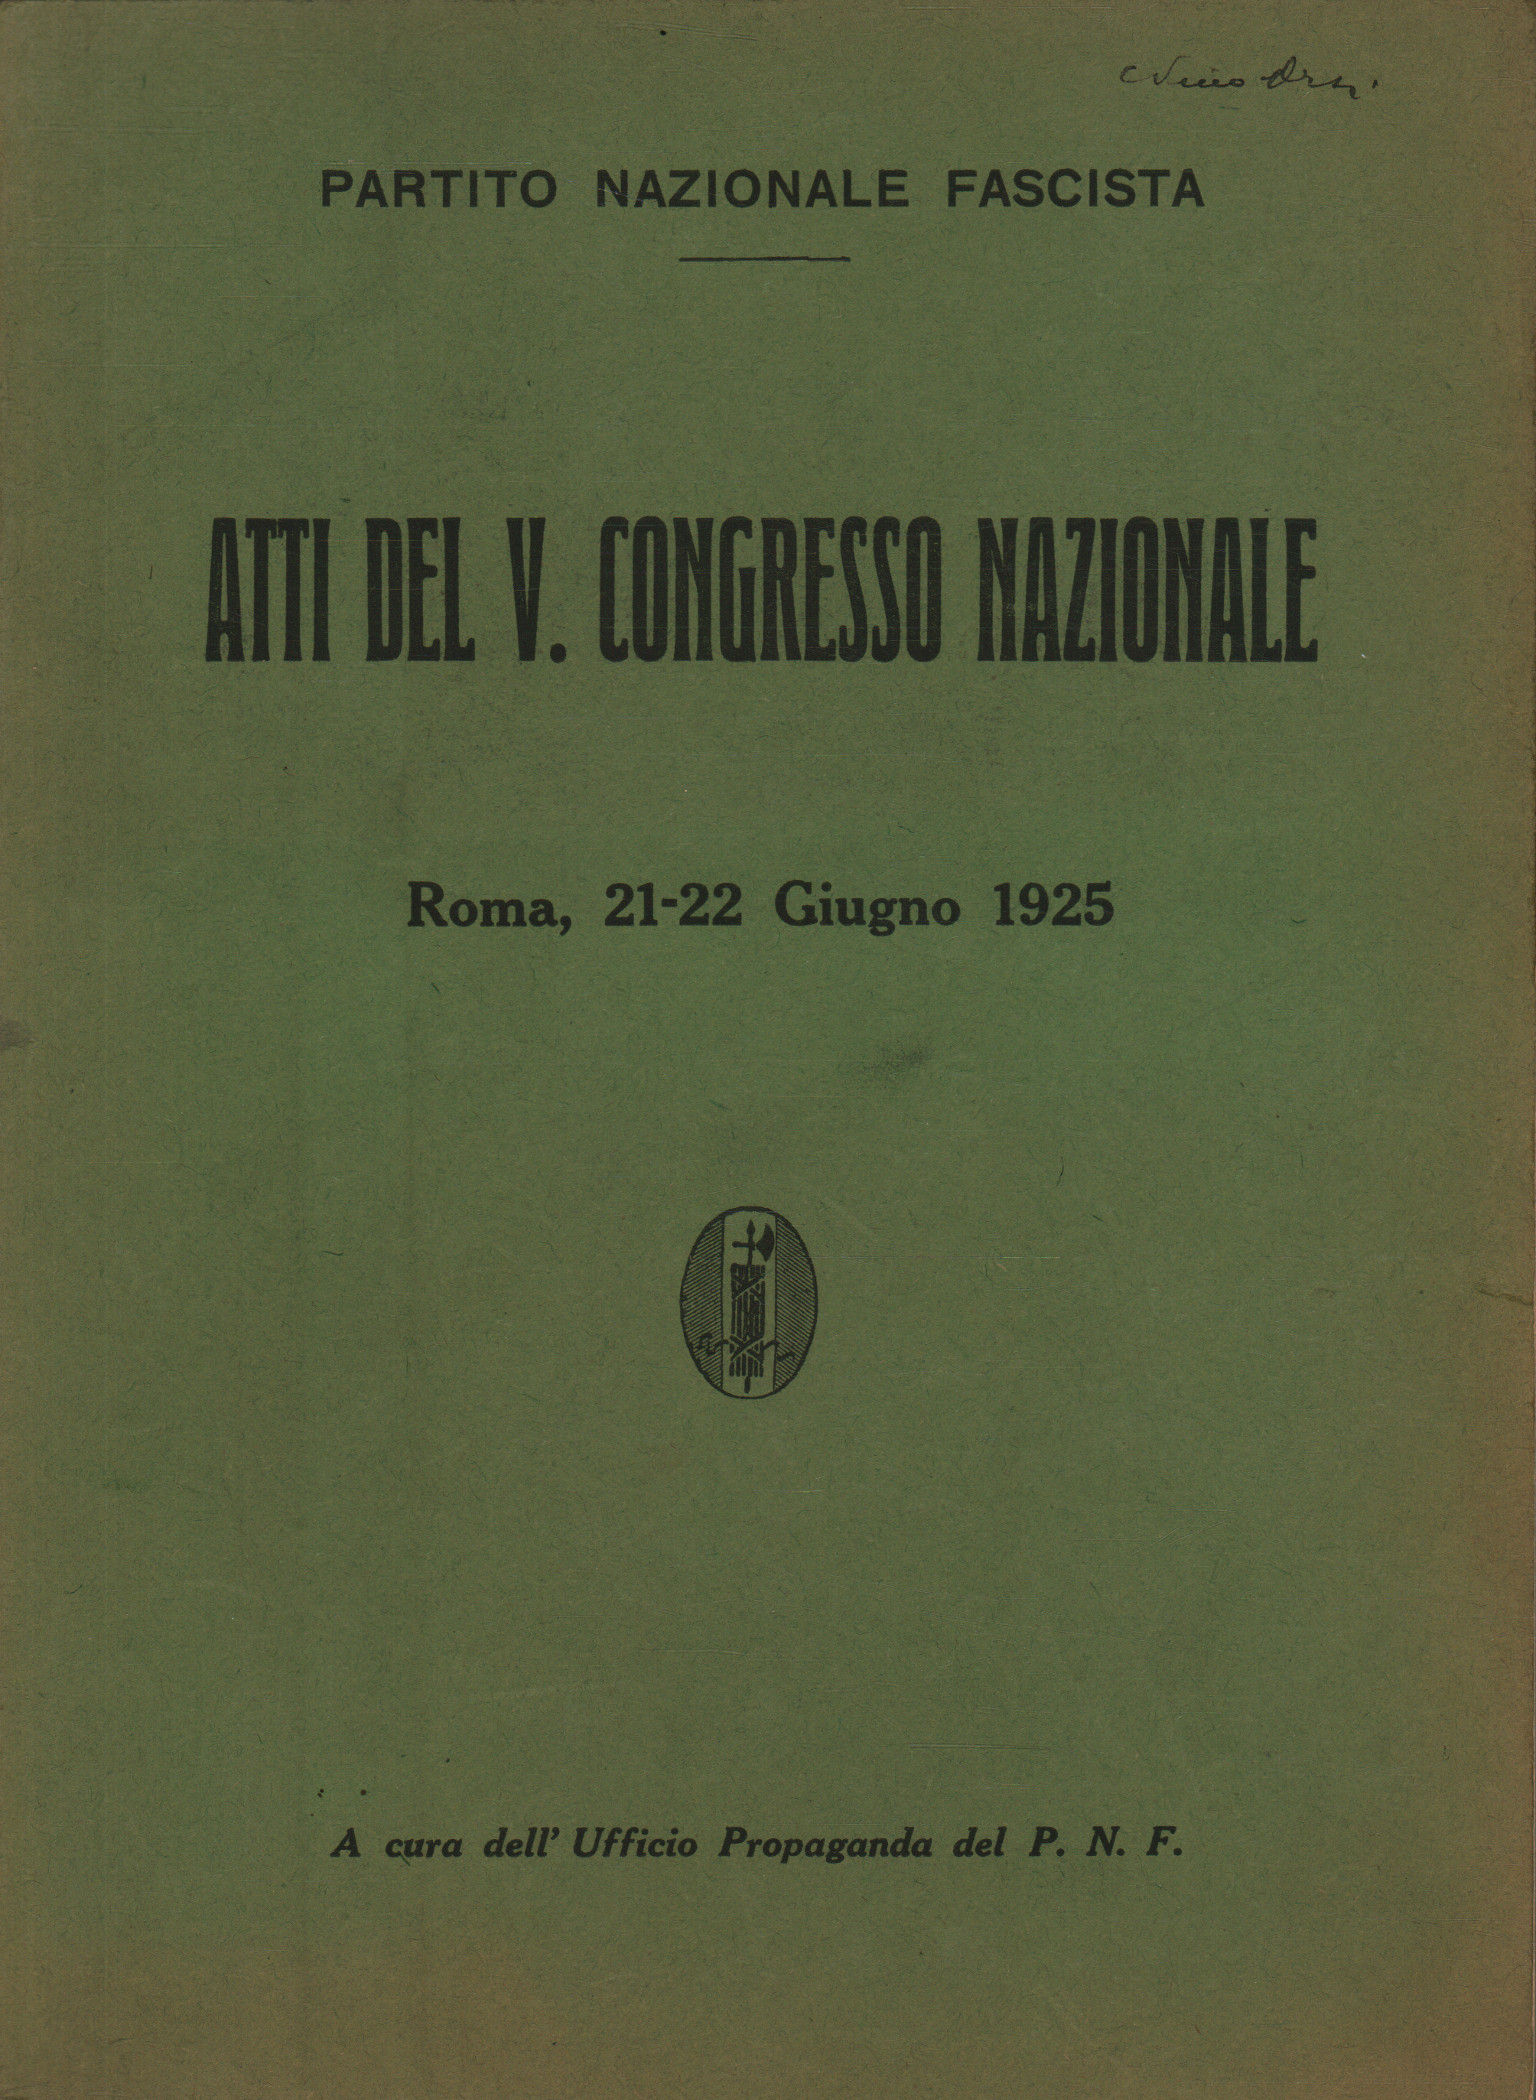 Proceedings of the 5th national congress